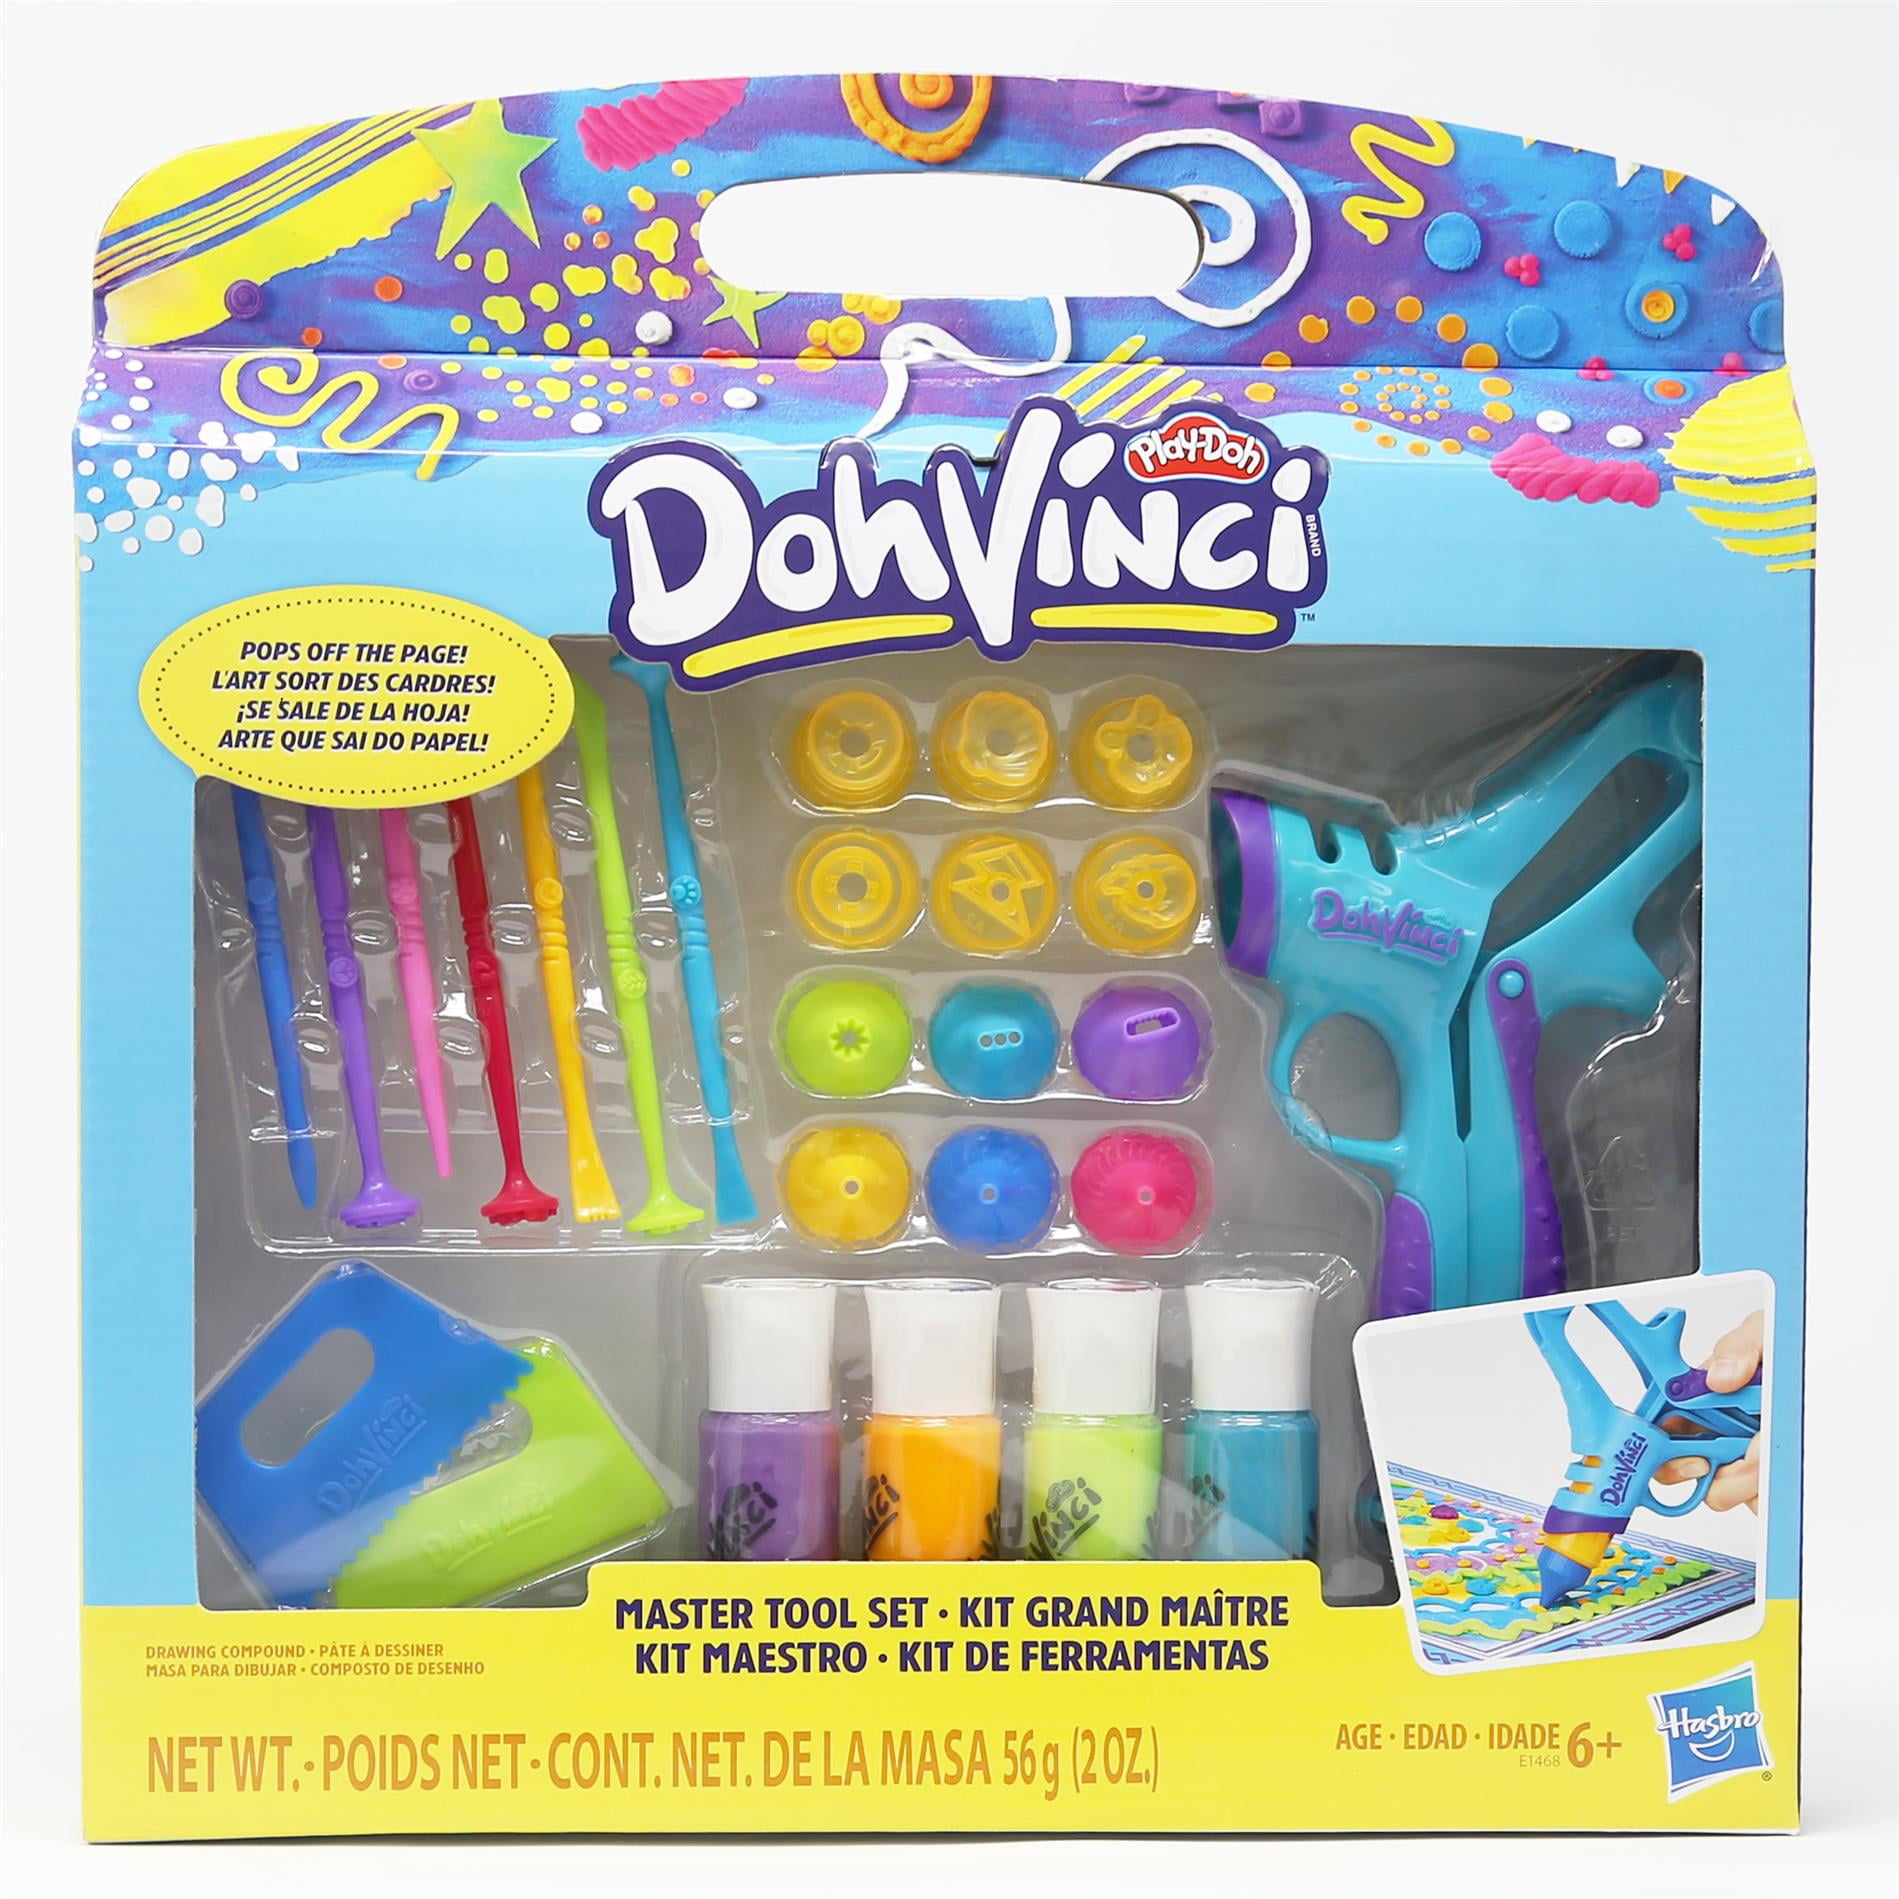 RABBIT School Play & Learn Kit, Play Doh Clay, Art Kit, Hobby for Kids, Art  Drawing Kit, 12 Color Oil Pastels Wax Colors Color Pencils, Celebration Kit, Hobby Bag of Assorted, Art Craft Kit